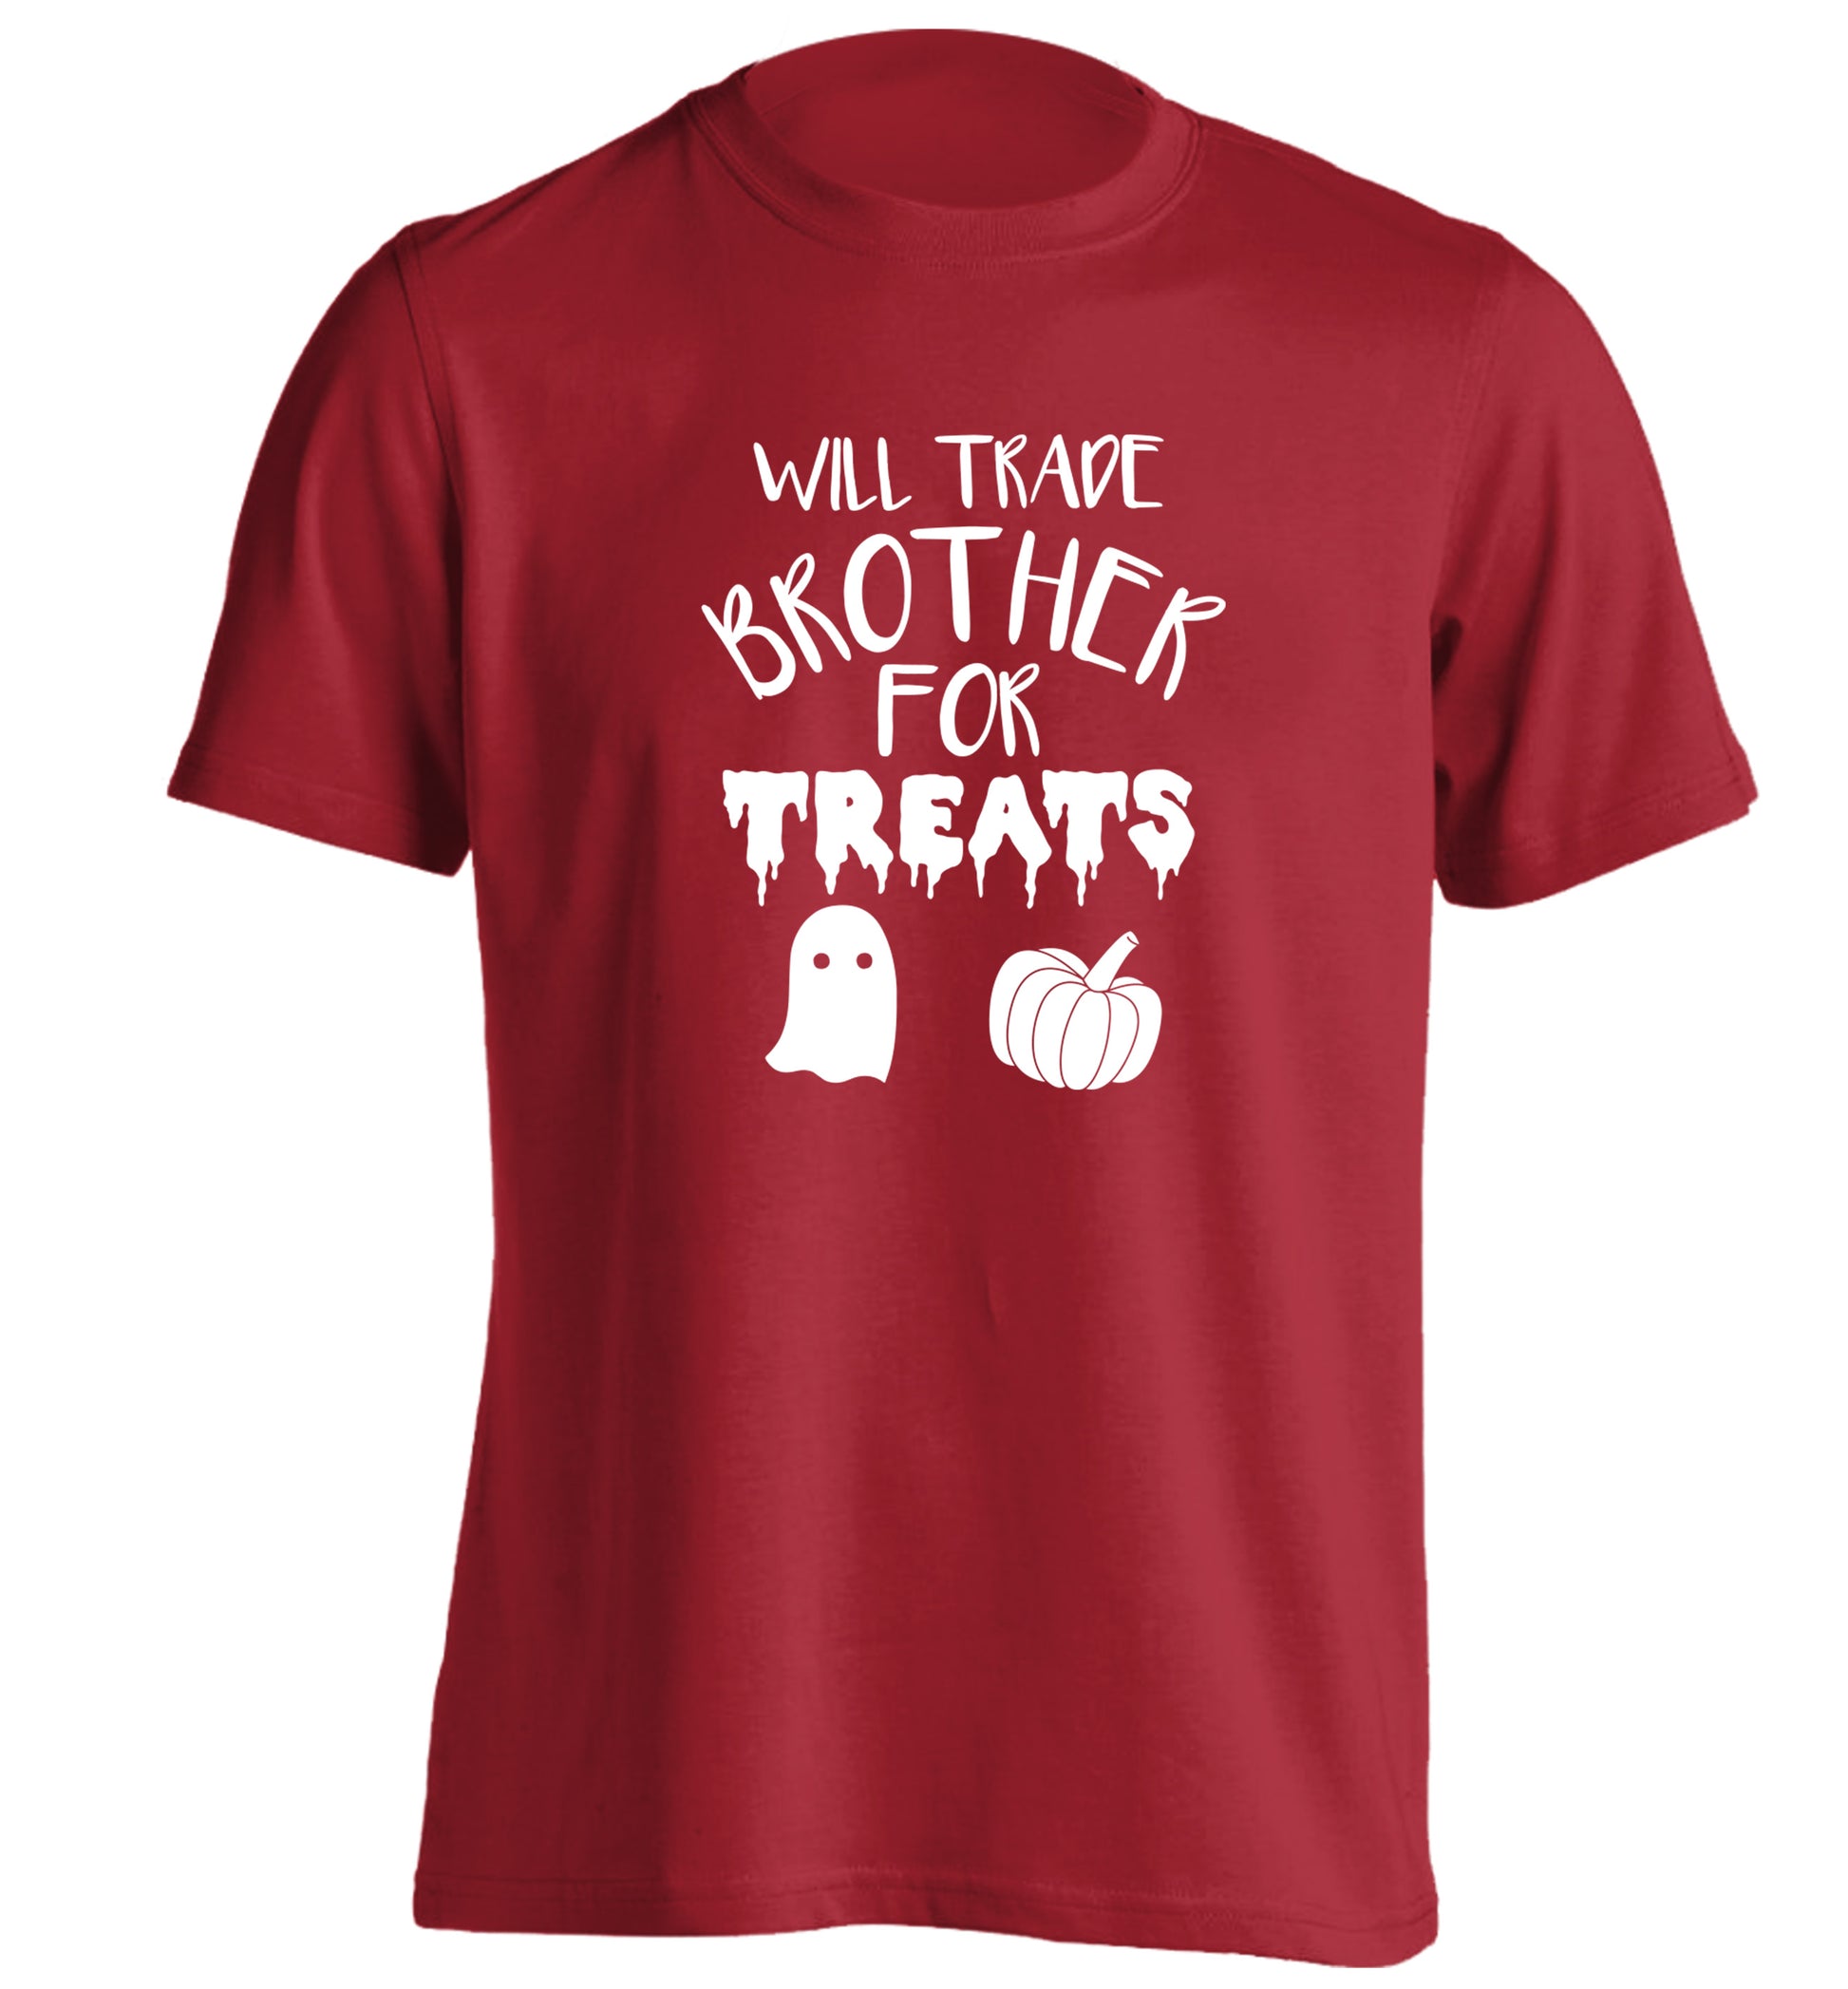 Will trade brother for sweets adults unisex red Tshirt 2XL